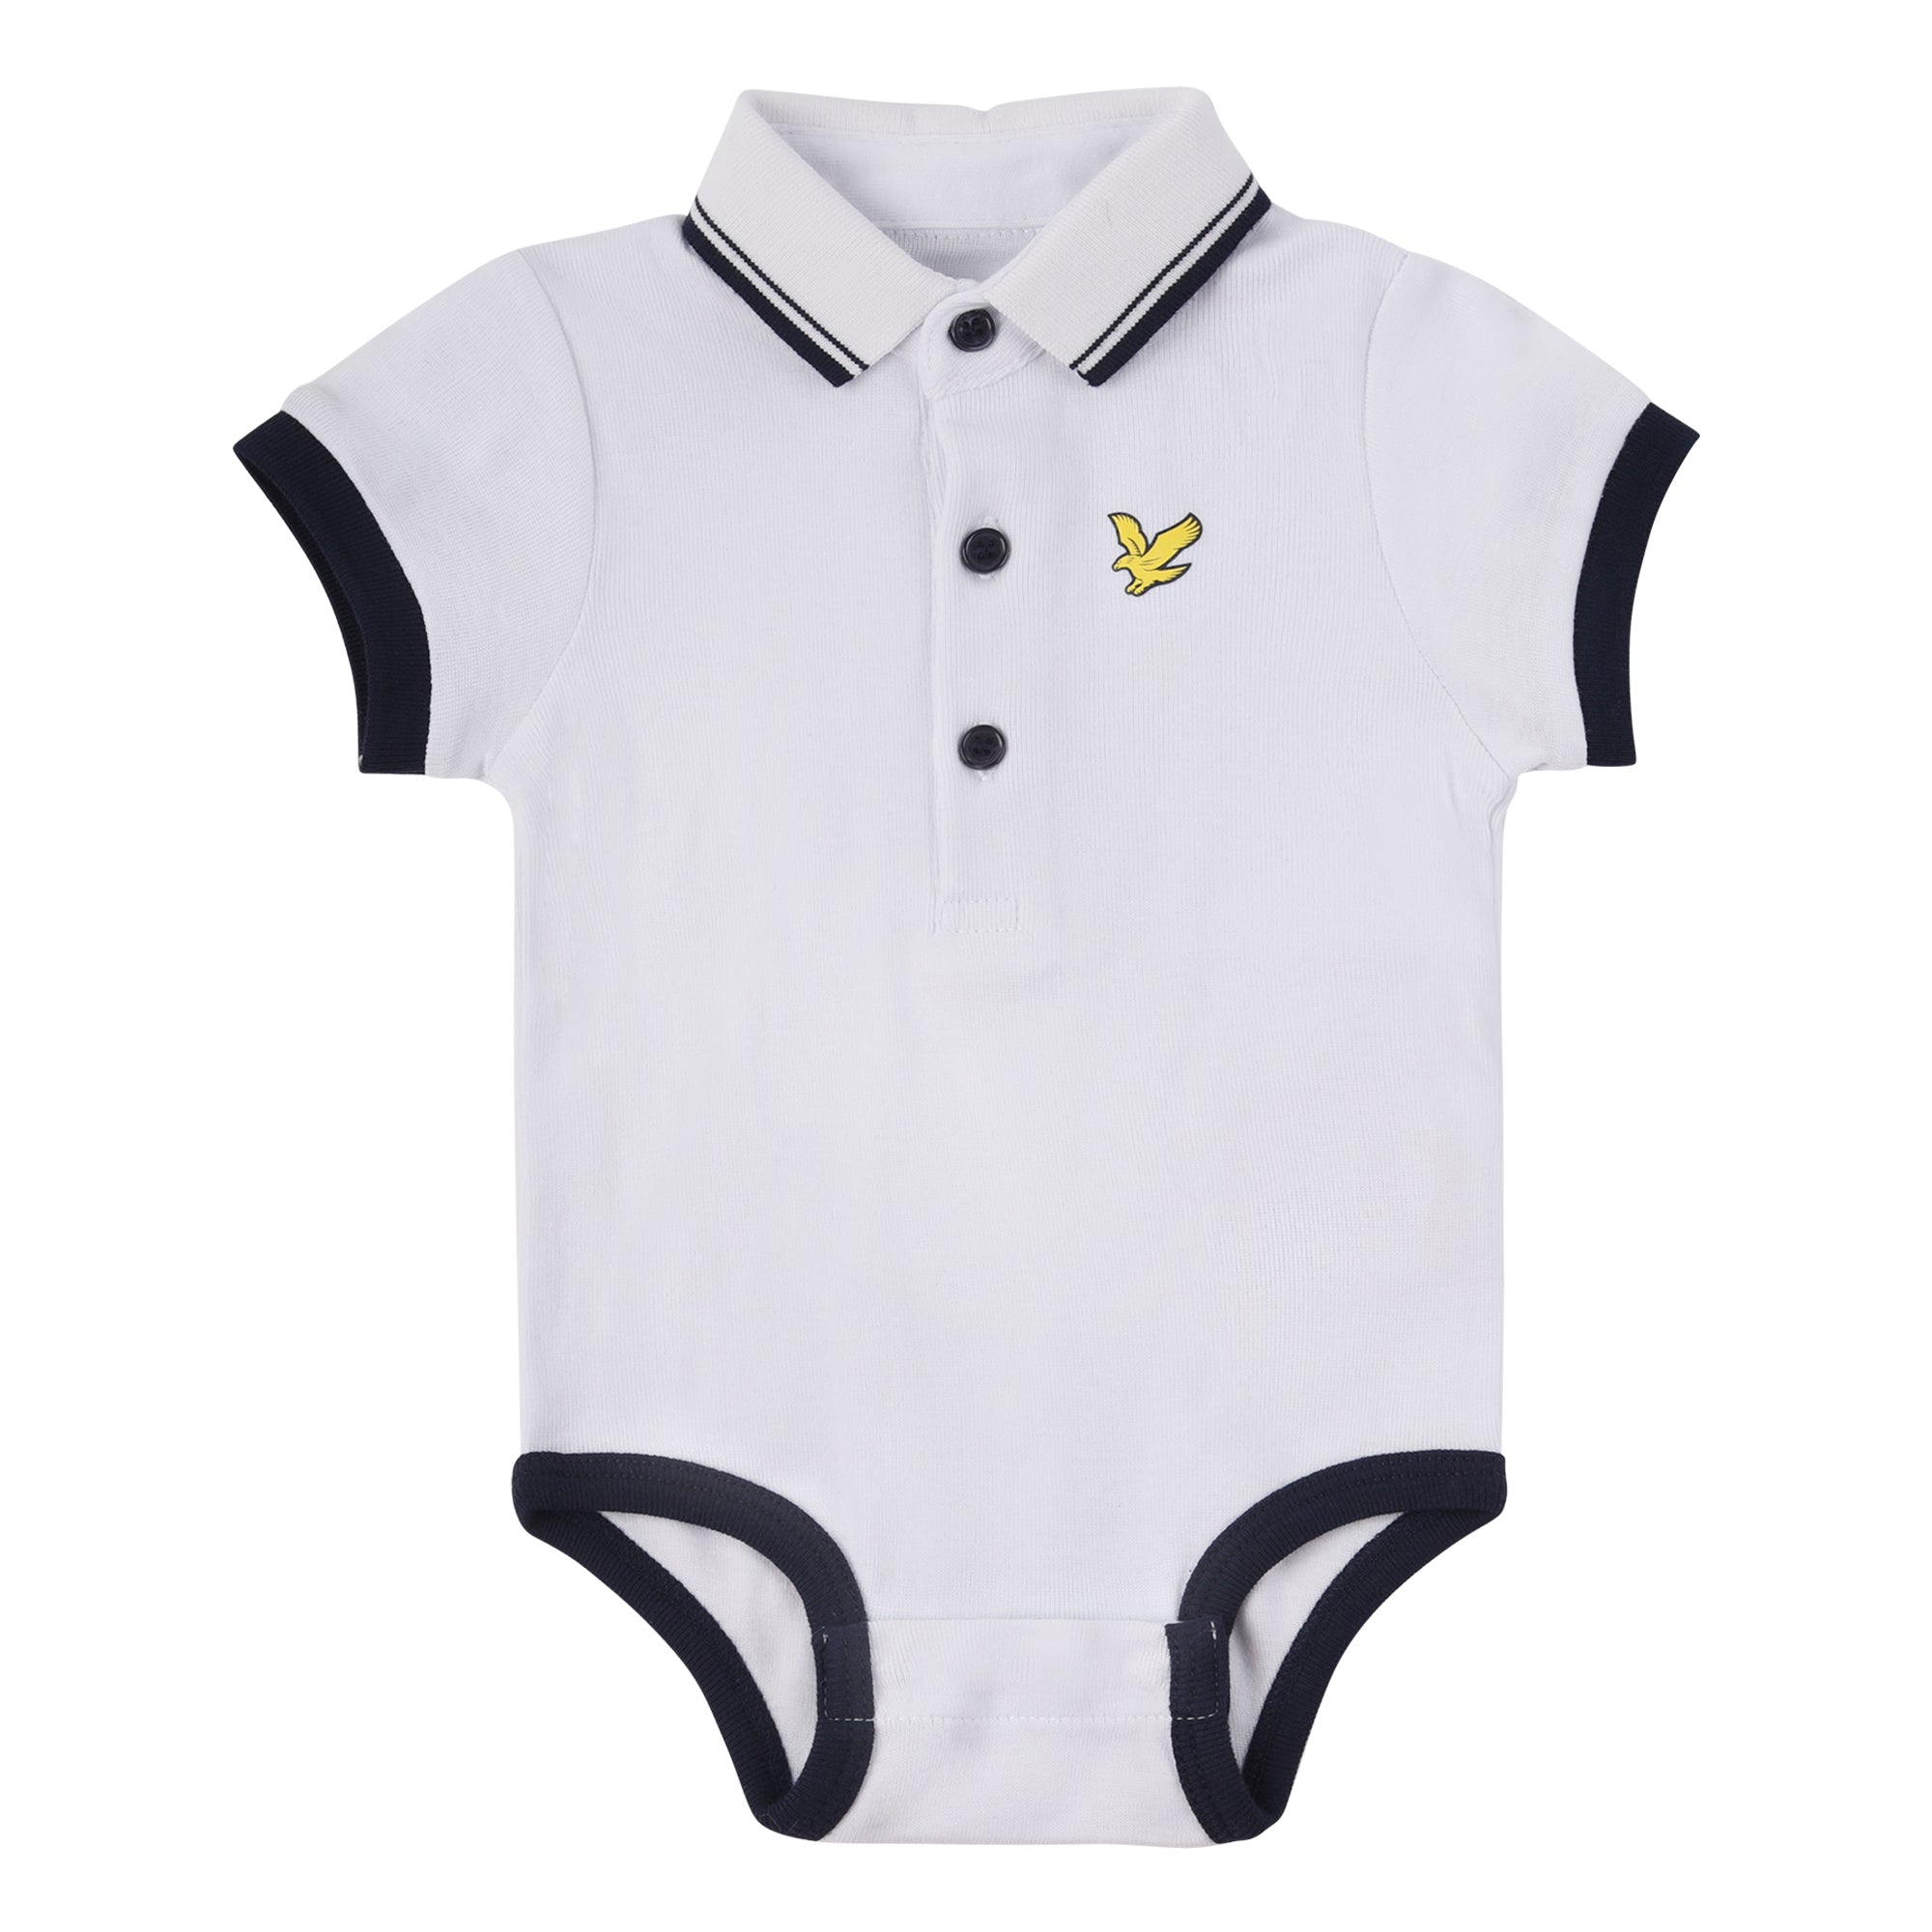 Lyle & Scott TIPPED POLO ROMPER BOXED